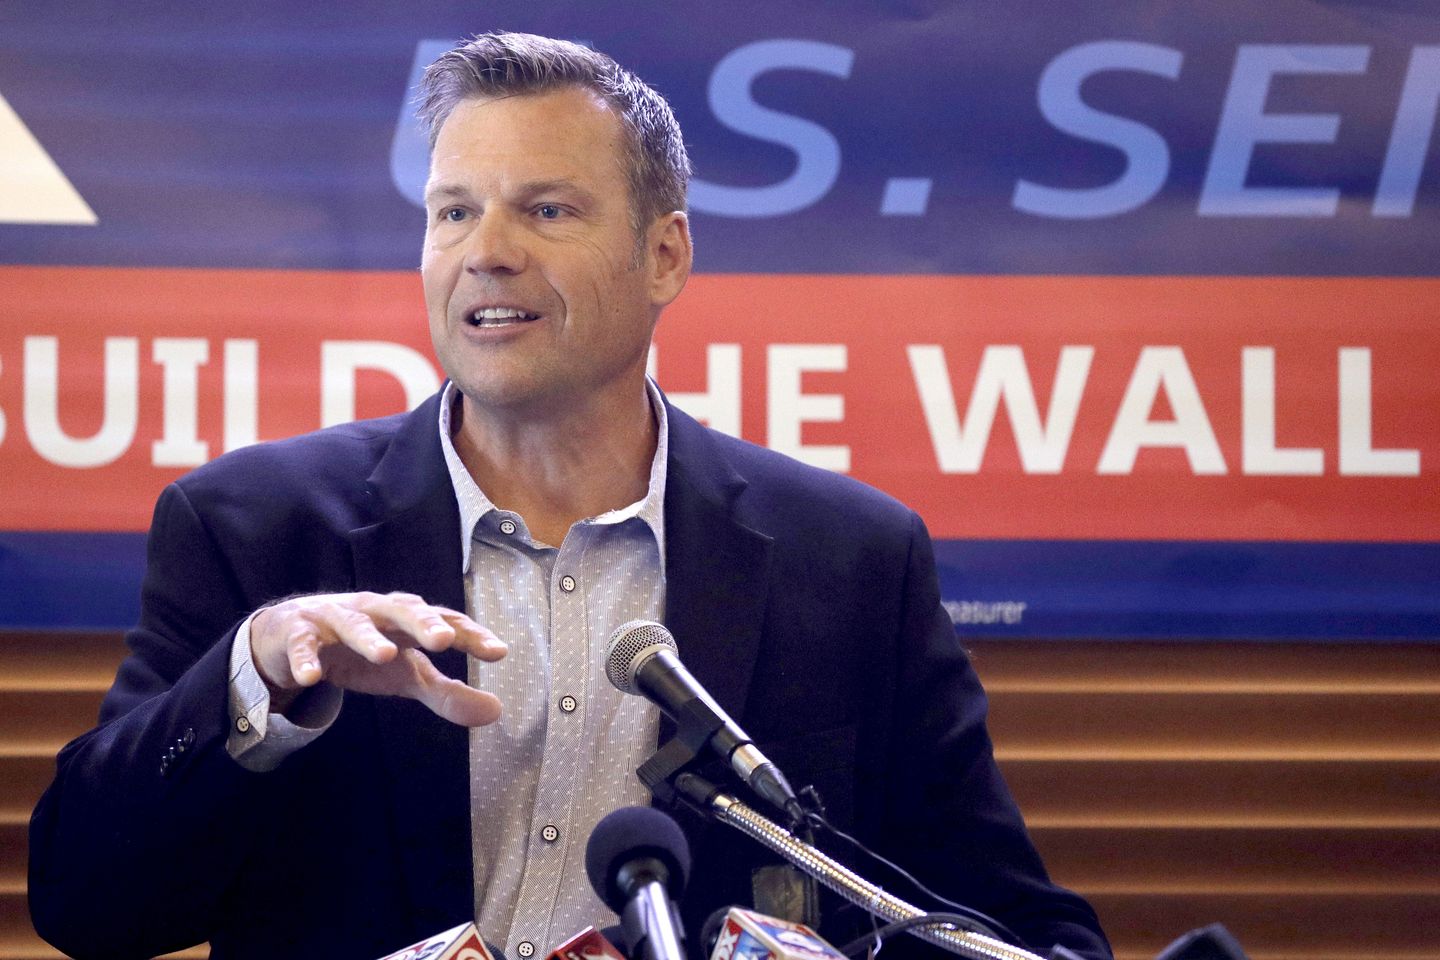 Kris Kobach looks for comeback in Kansas after losing 2 big races